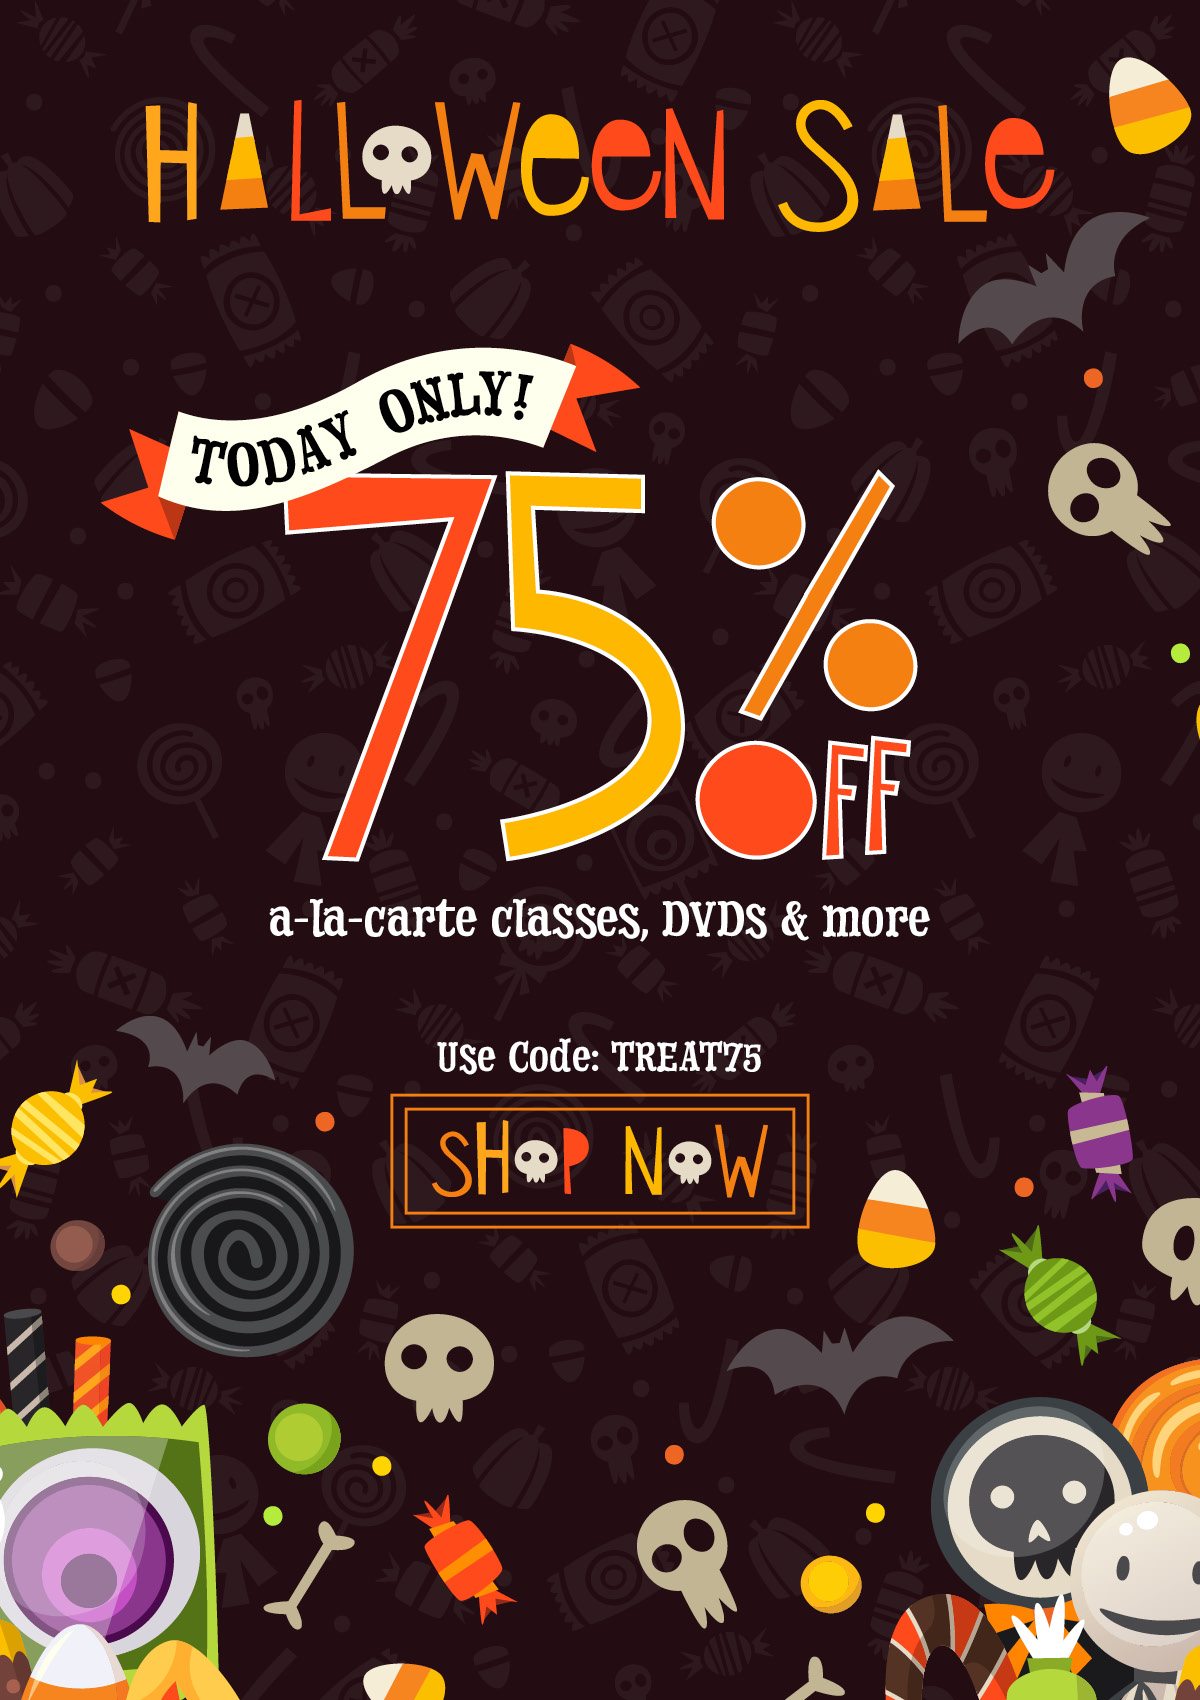 Halloween Sale Today Only! Treat Your Creative Side with 75% OFF A-la-carte classes, DVDs & more Use Code: TREAT75